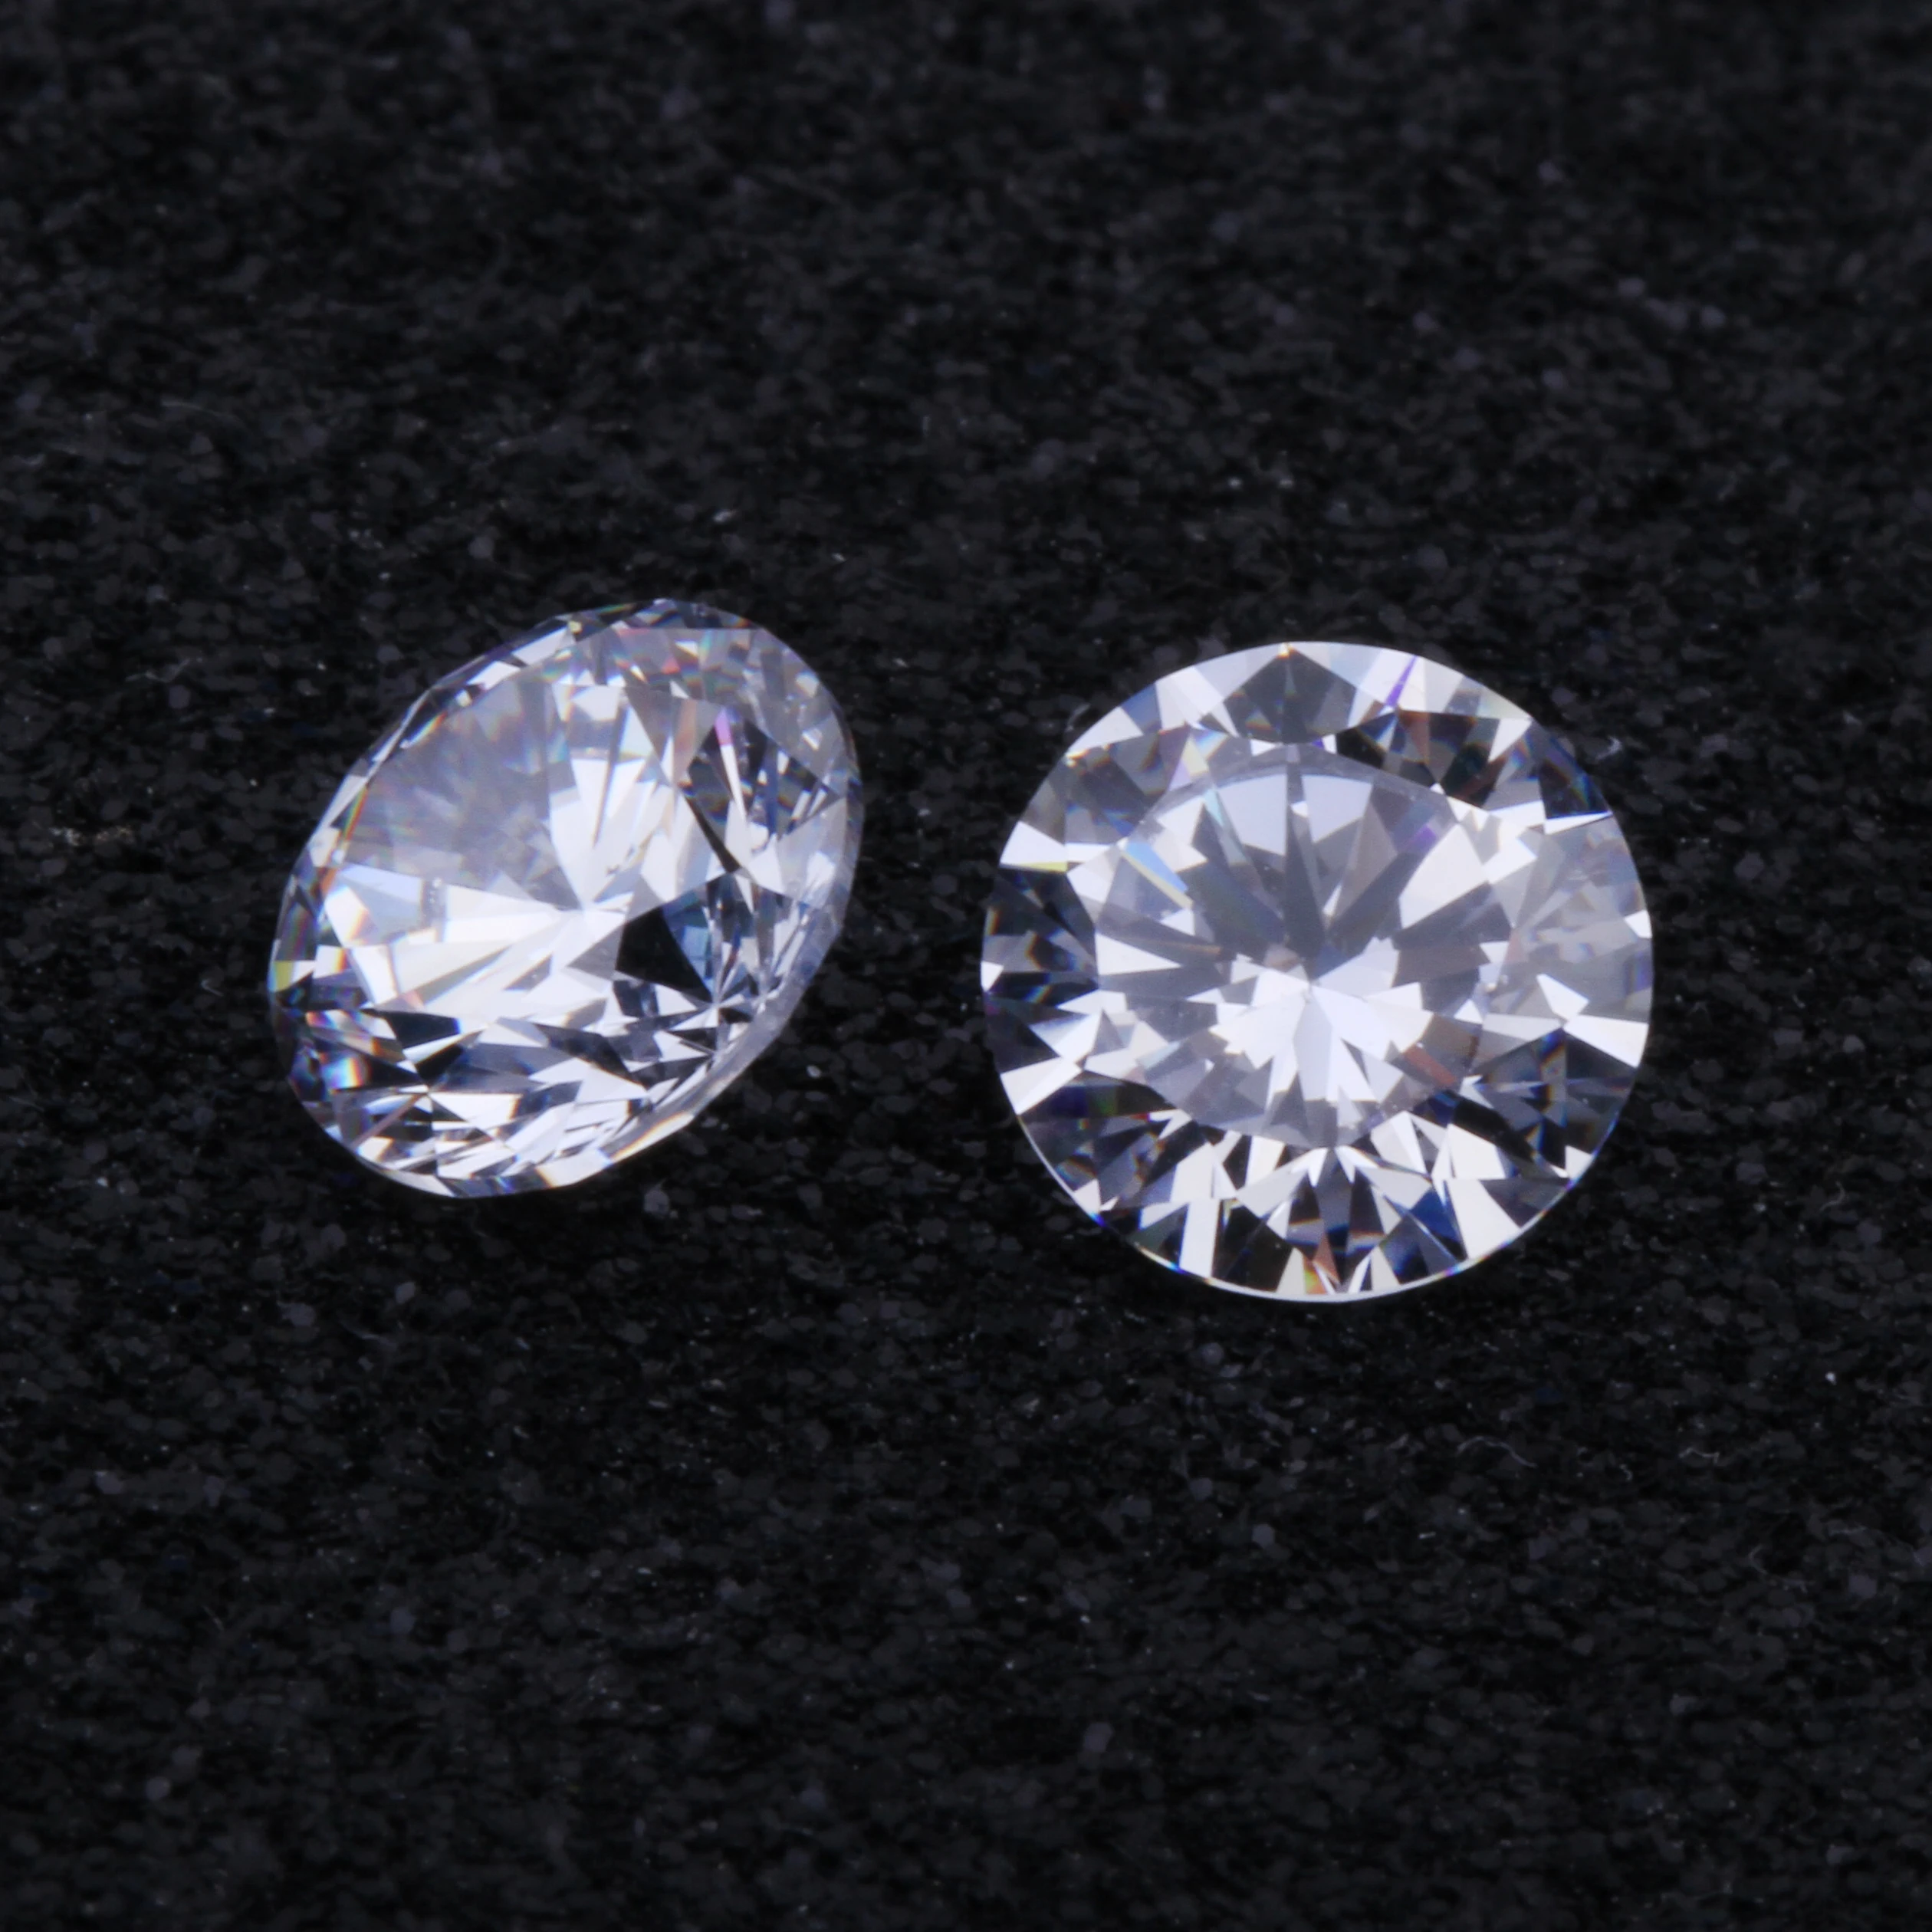 NATURAL WHITE ZIRCON Loose  LOT of 20PCS.Round Cut  1.1 to 1.2 mm GEMSTONES 